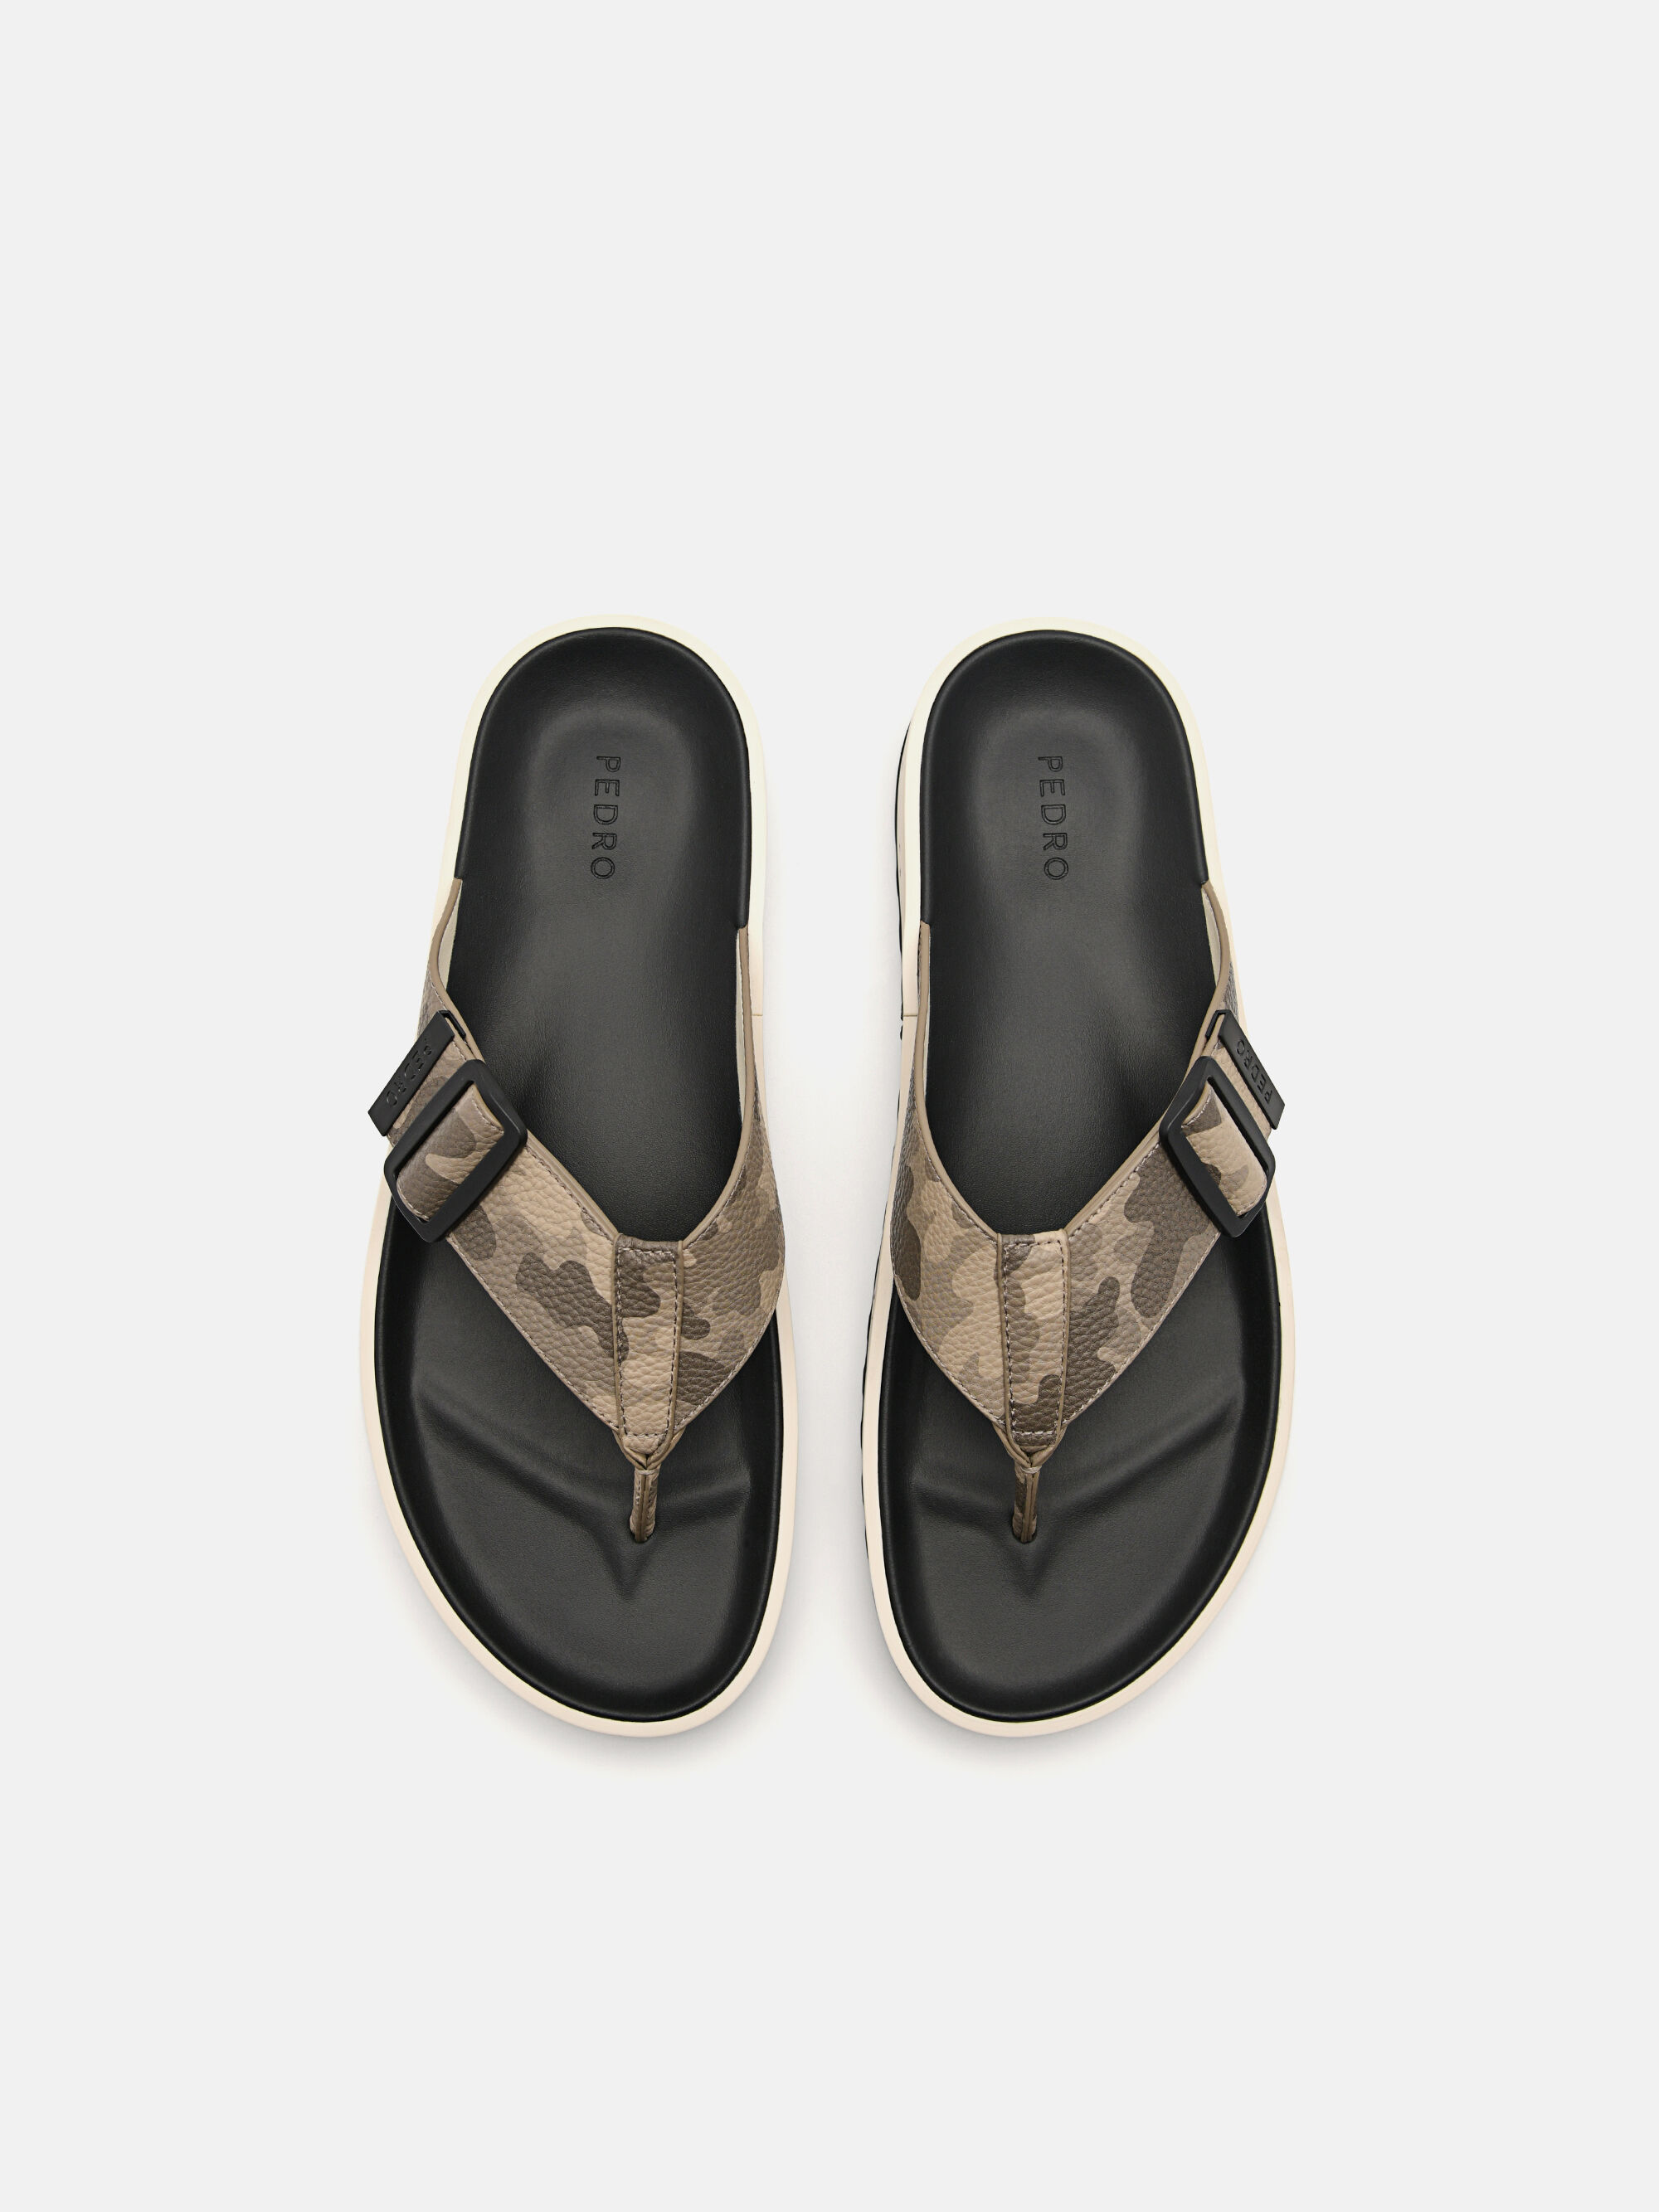 George Thong Sandals, Taupe